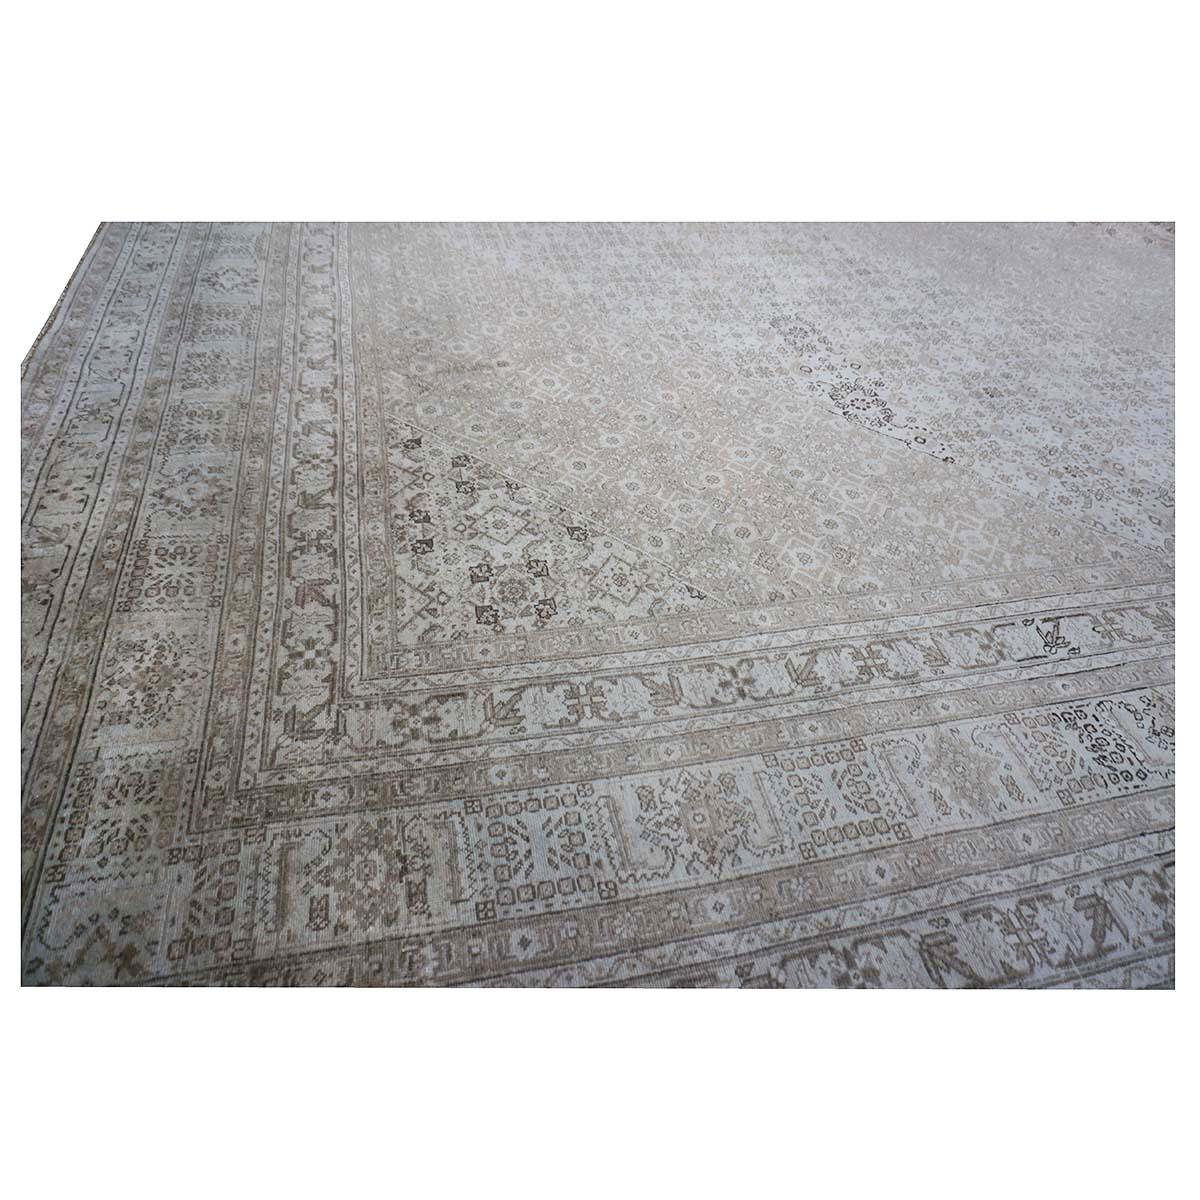 Hand-Woven Antique Shabby Chic Distressed Persian Tabriz 13x18 Ivory & Tan Handmade Rug For Sale